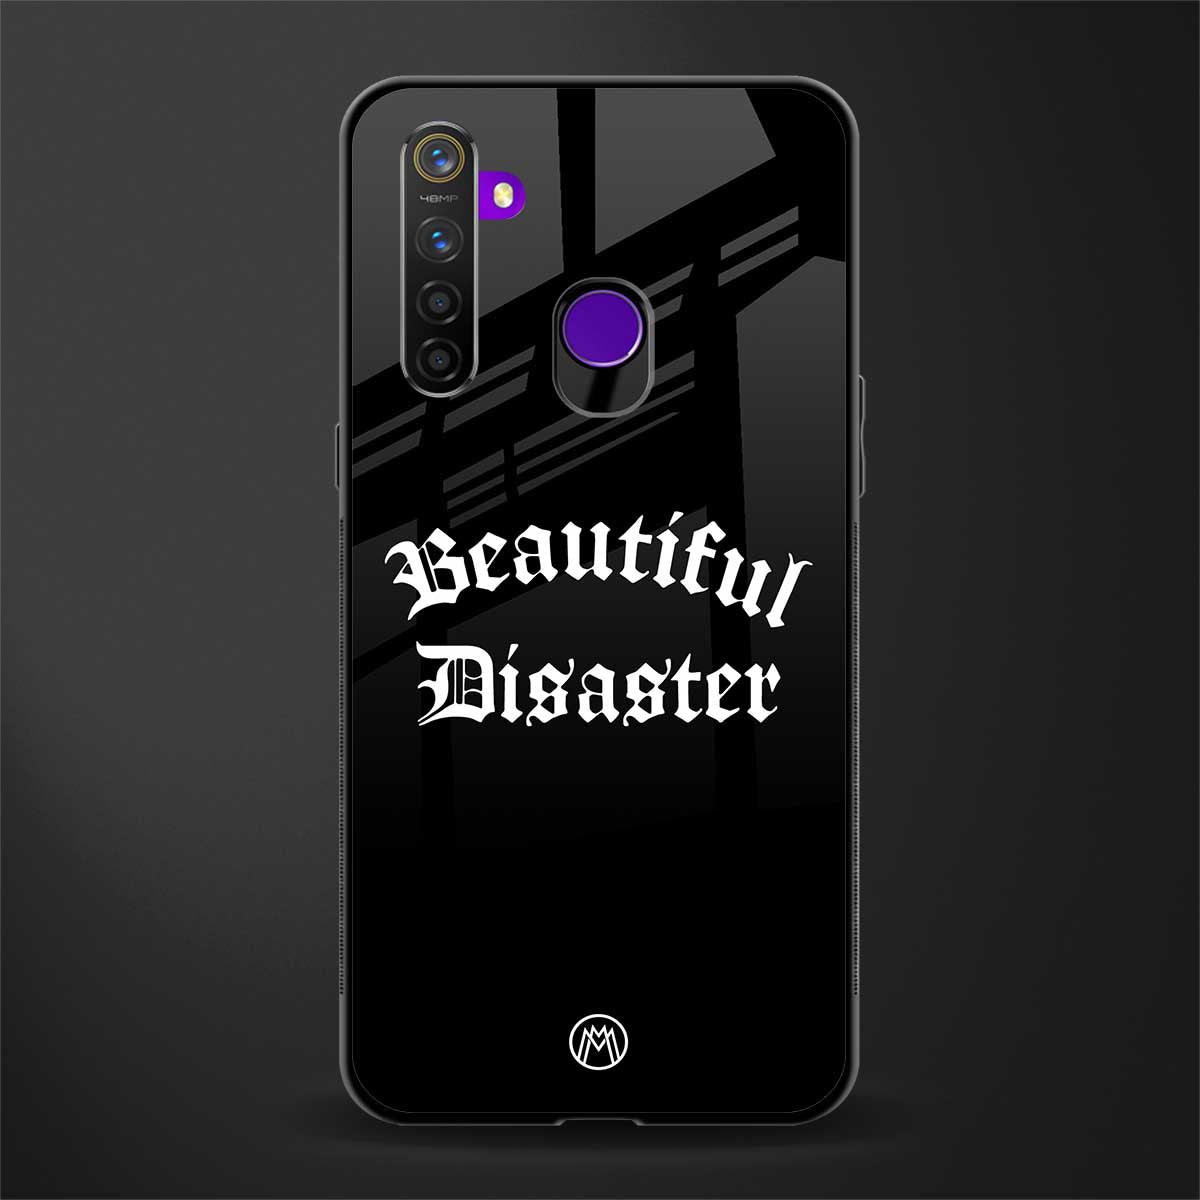 beautiful disaster glass case for realme narzo 10 image